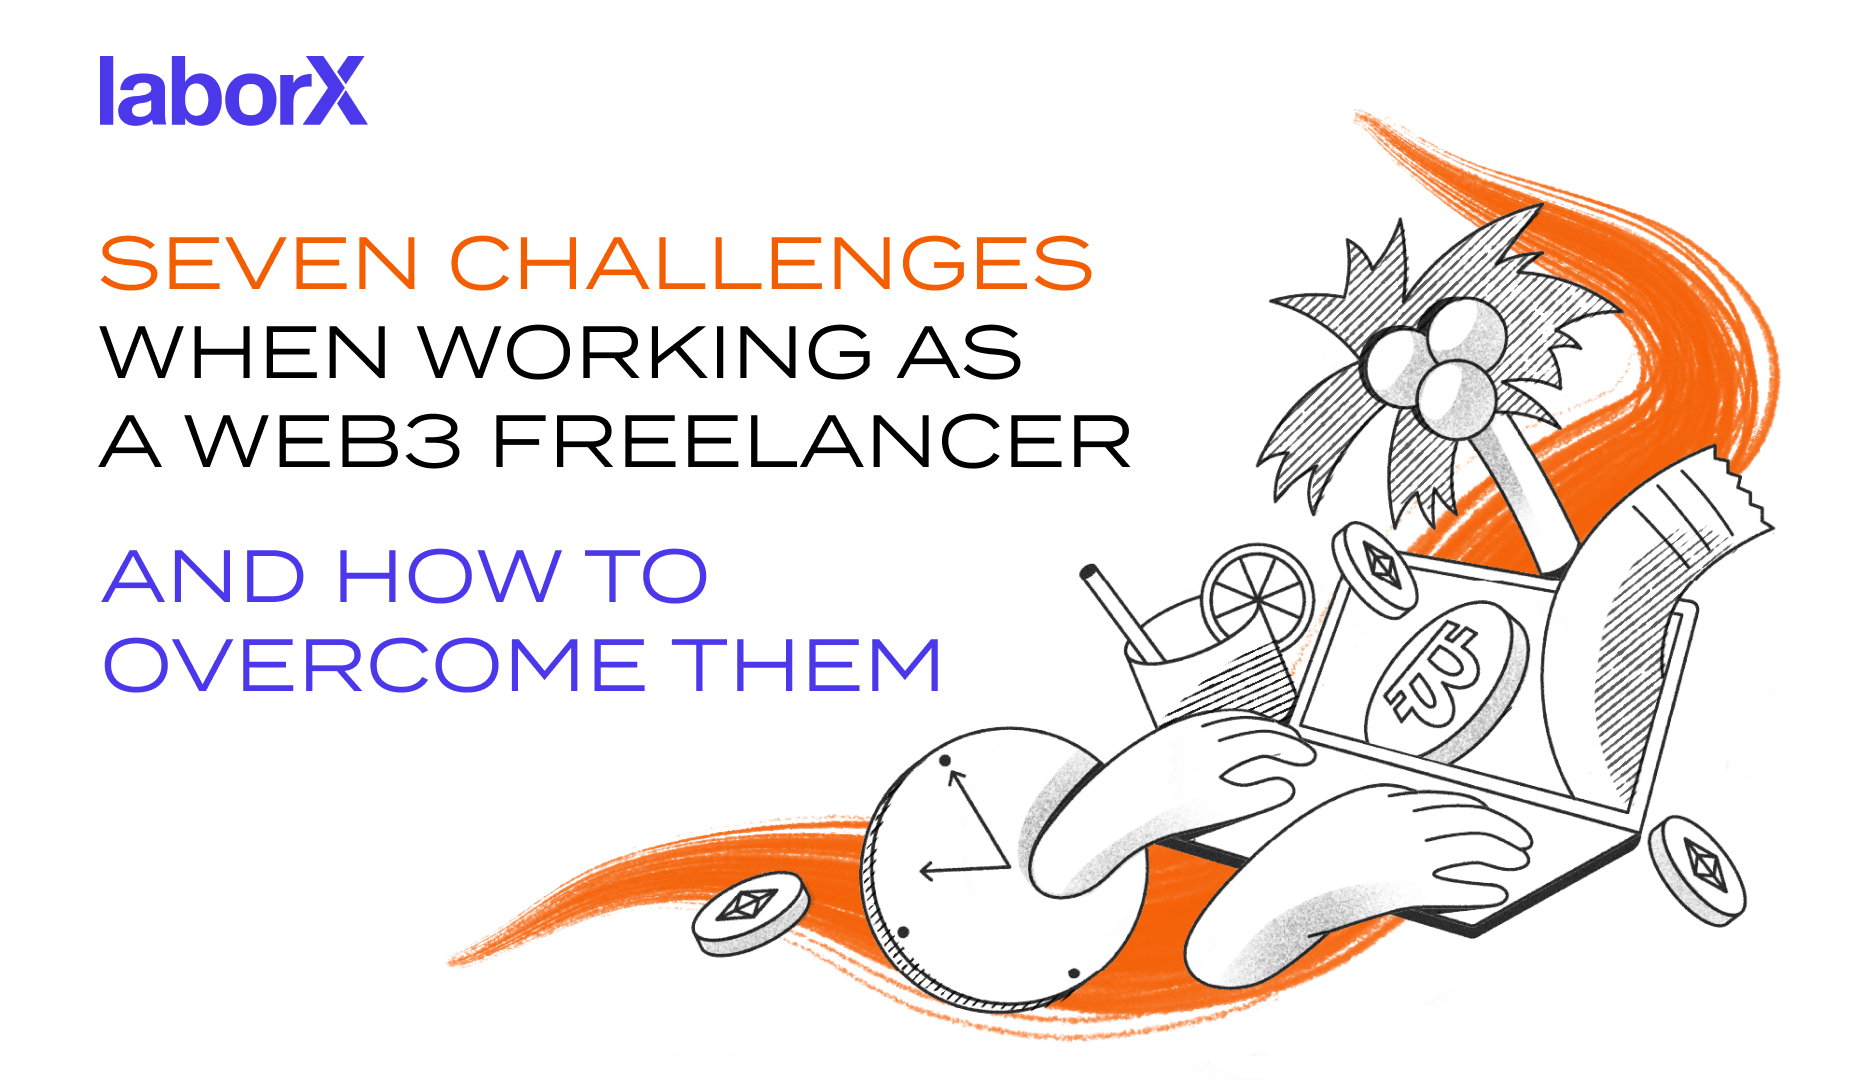 How To Overcome Challenges As A Web3 Freelancer